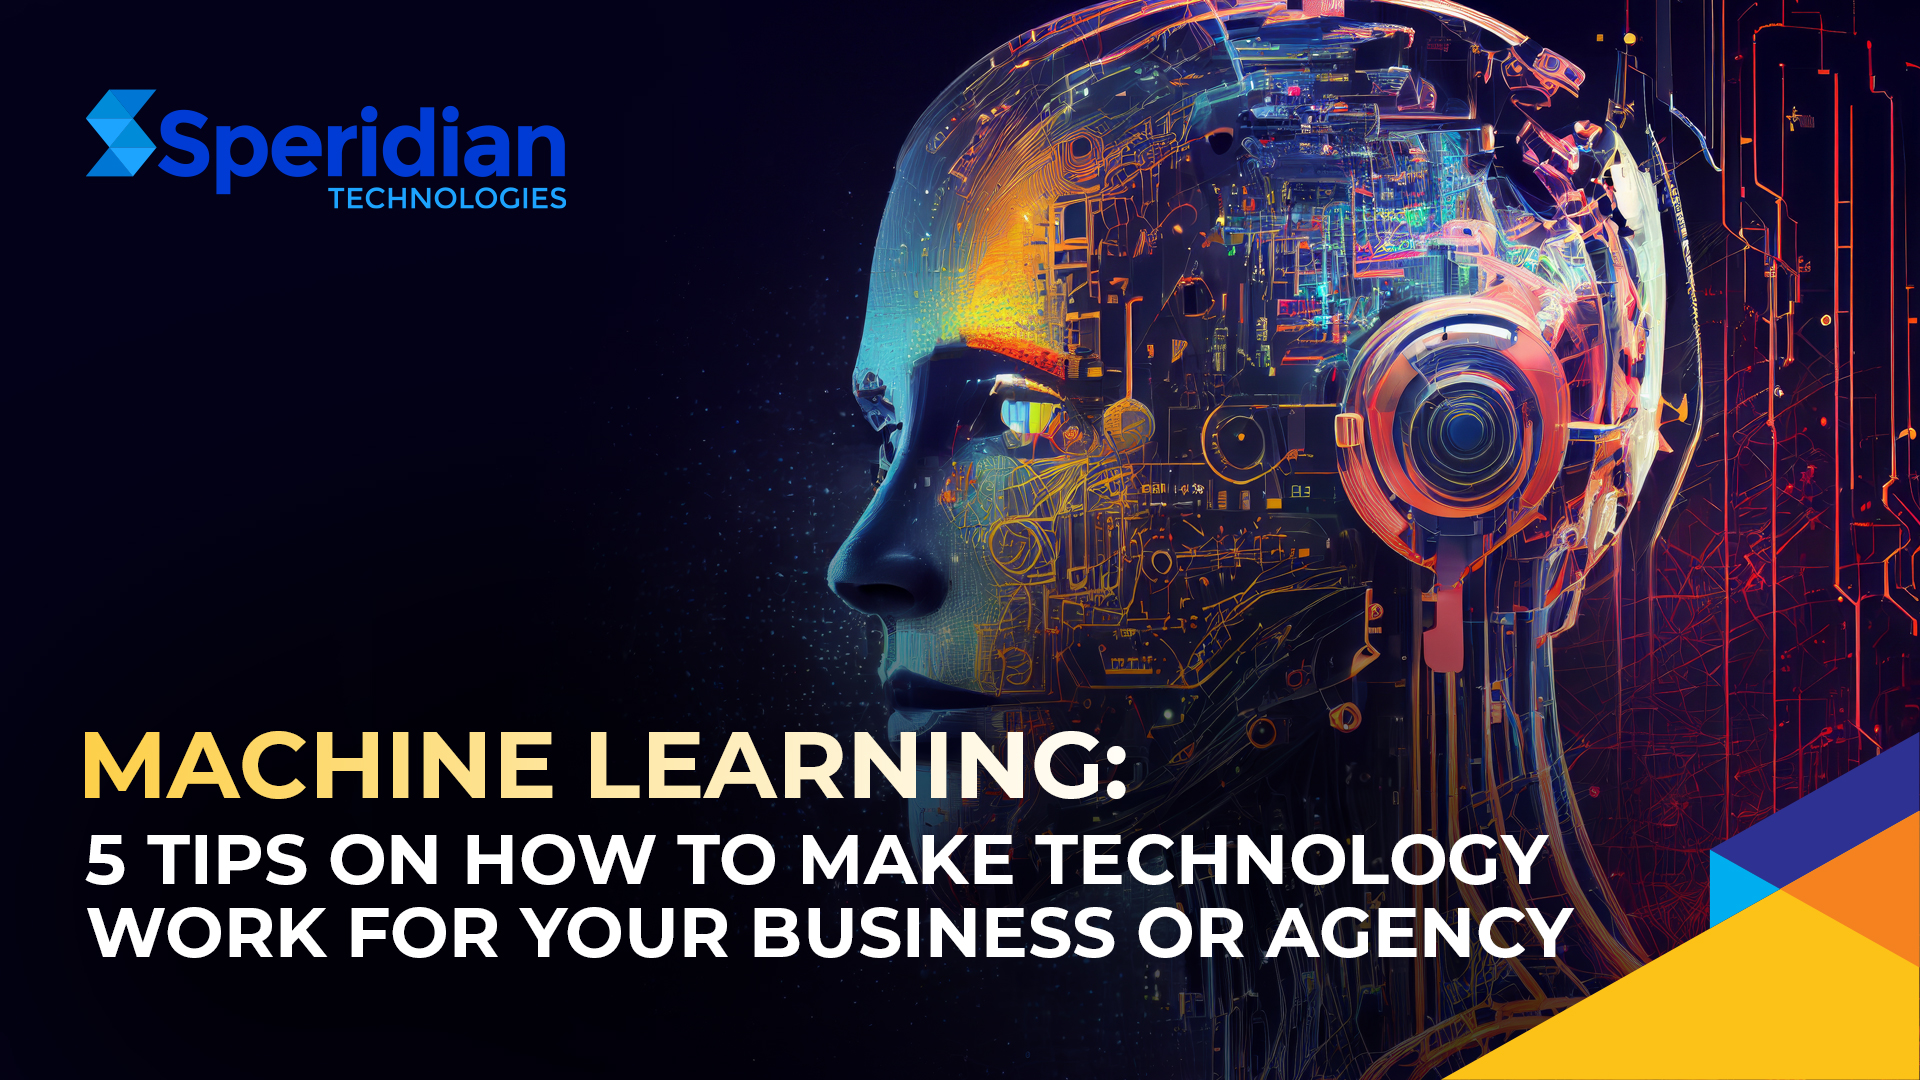 Machine Learning: 5 Tips on How to Make Technology Work for Your Business or Agency